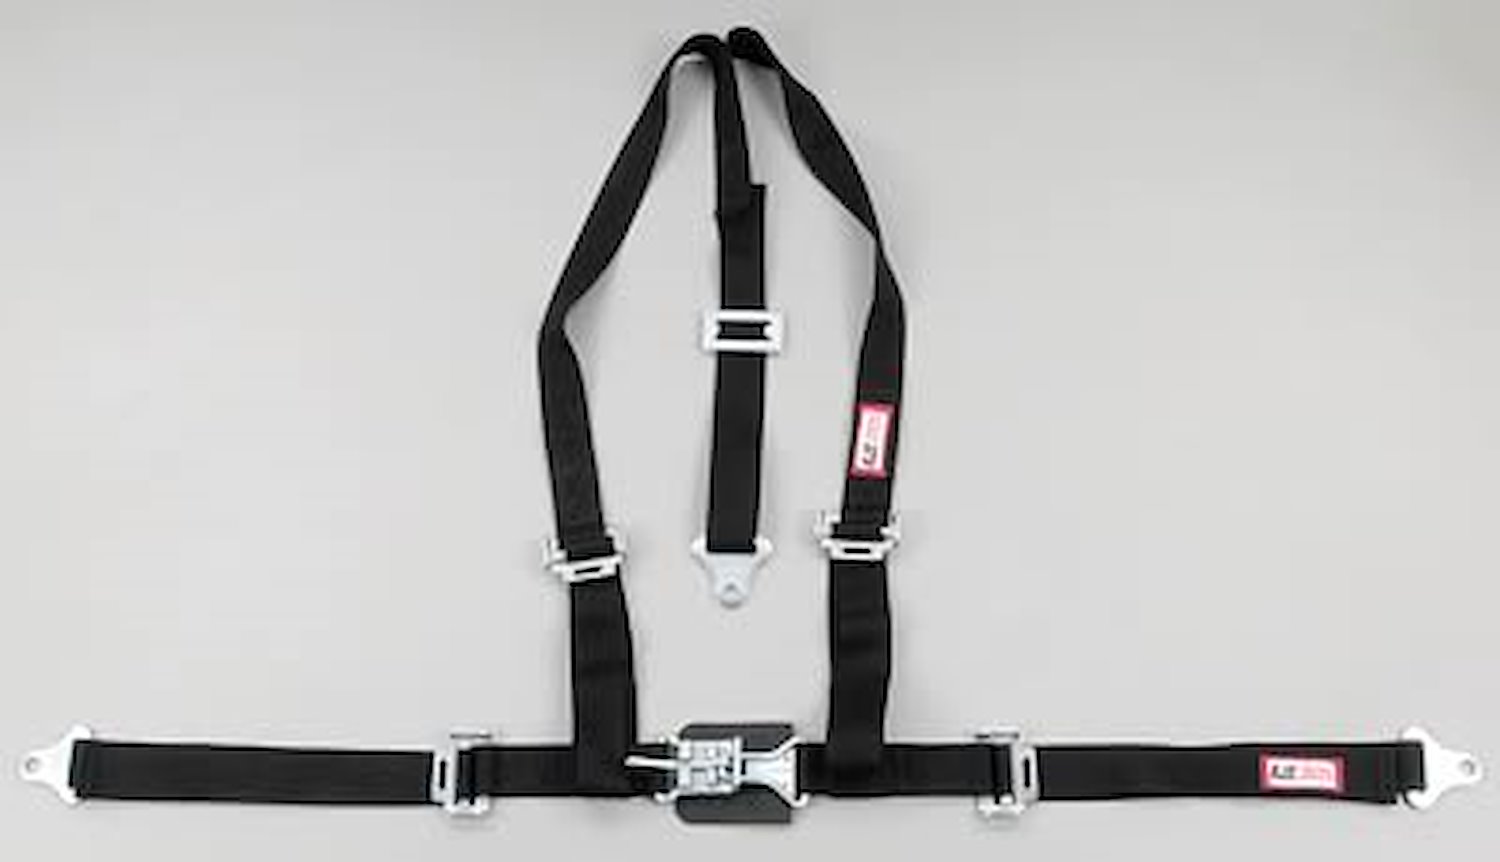 NON-SFI L&L HARNESS 2 PULL UP Lap Belt SNAP SEWN IN 2 S.H. INDIVIDUAL FLOOR Mount w/STERNUM STRAP WRAP/SNAP ORANGE